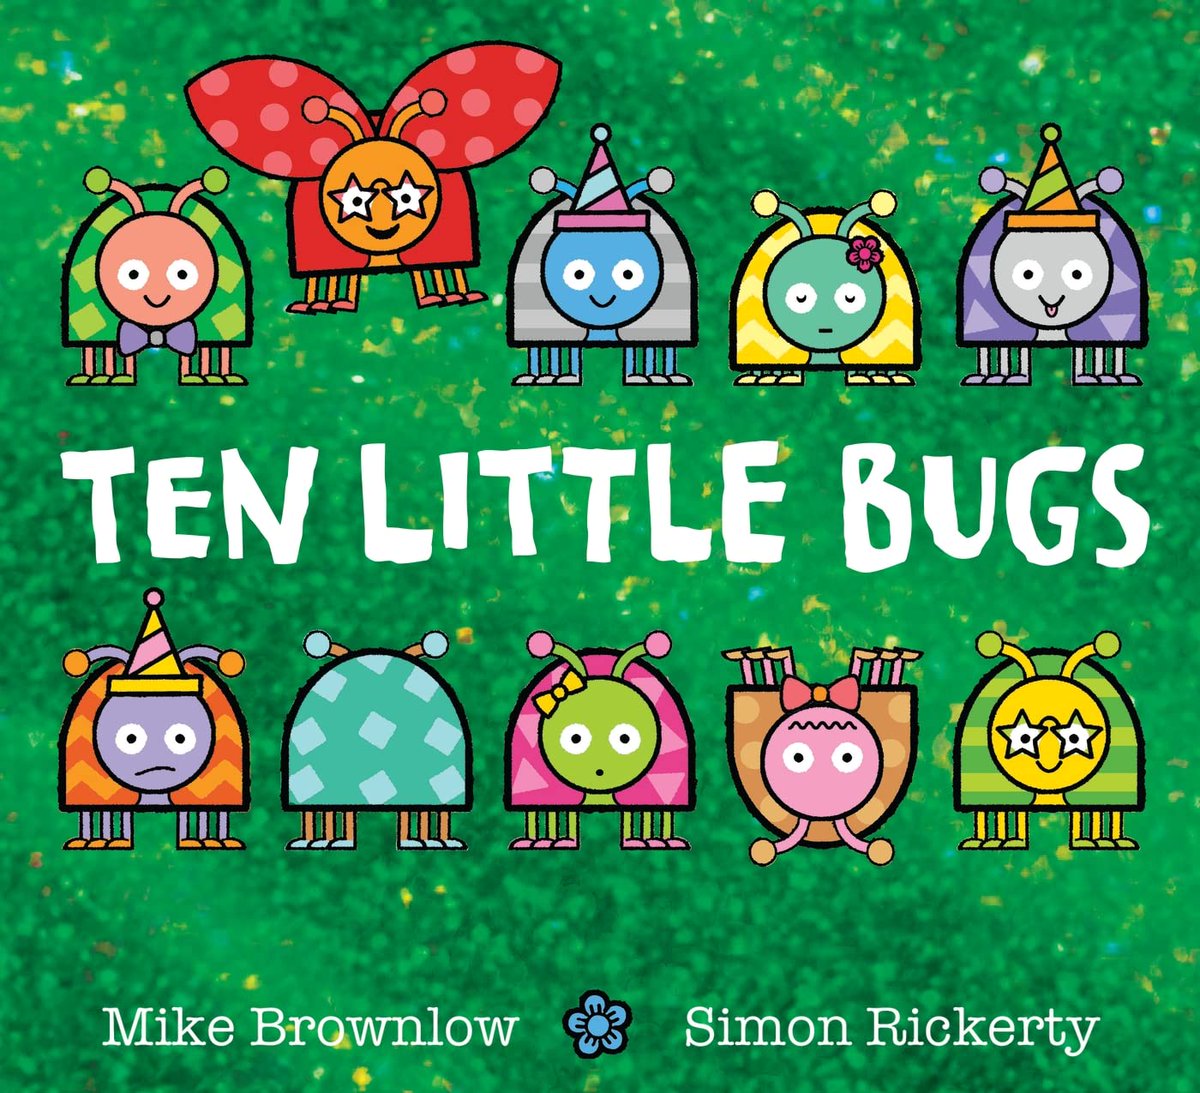 Happy Publication Day to the sparkly board book edition of Ten Little Bugs, illustrated by @SimonRickerty and written by Mike Brownlow!🪲 @HachetteKids